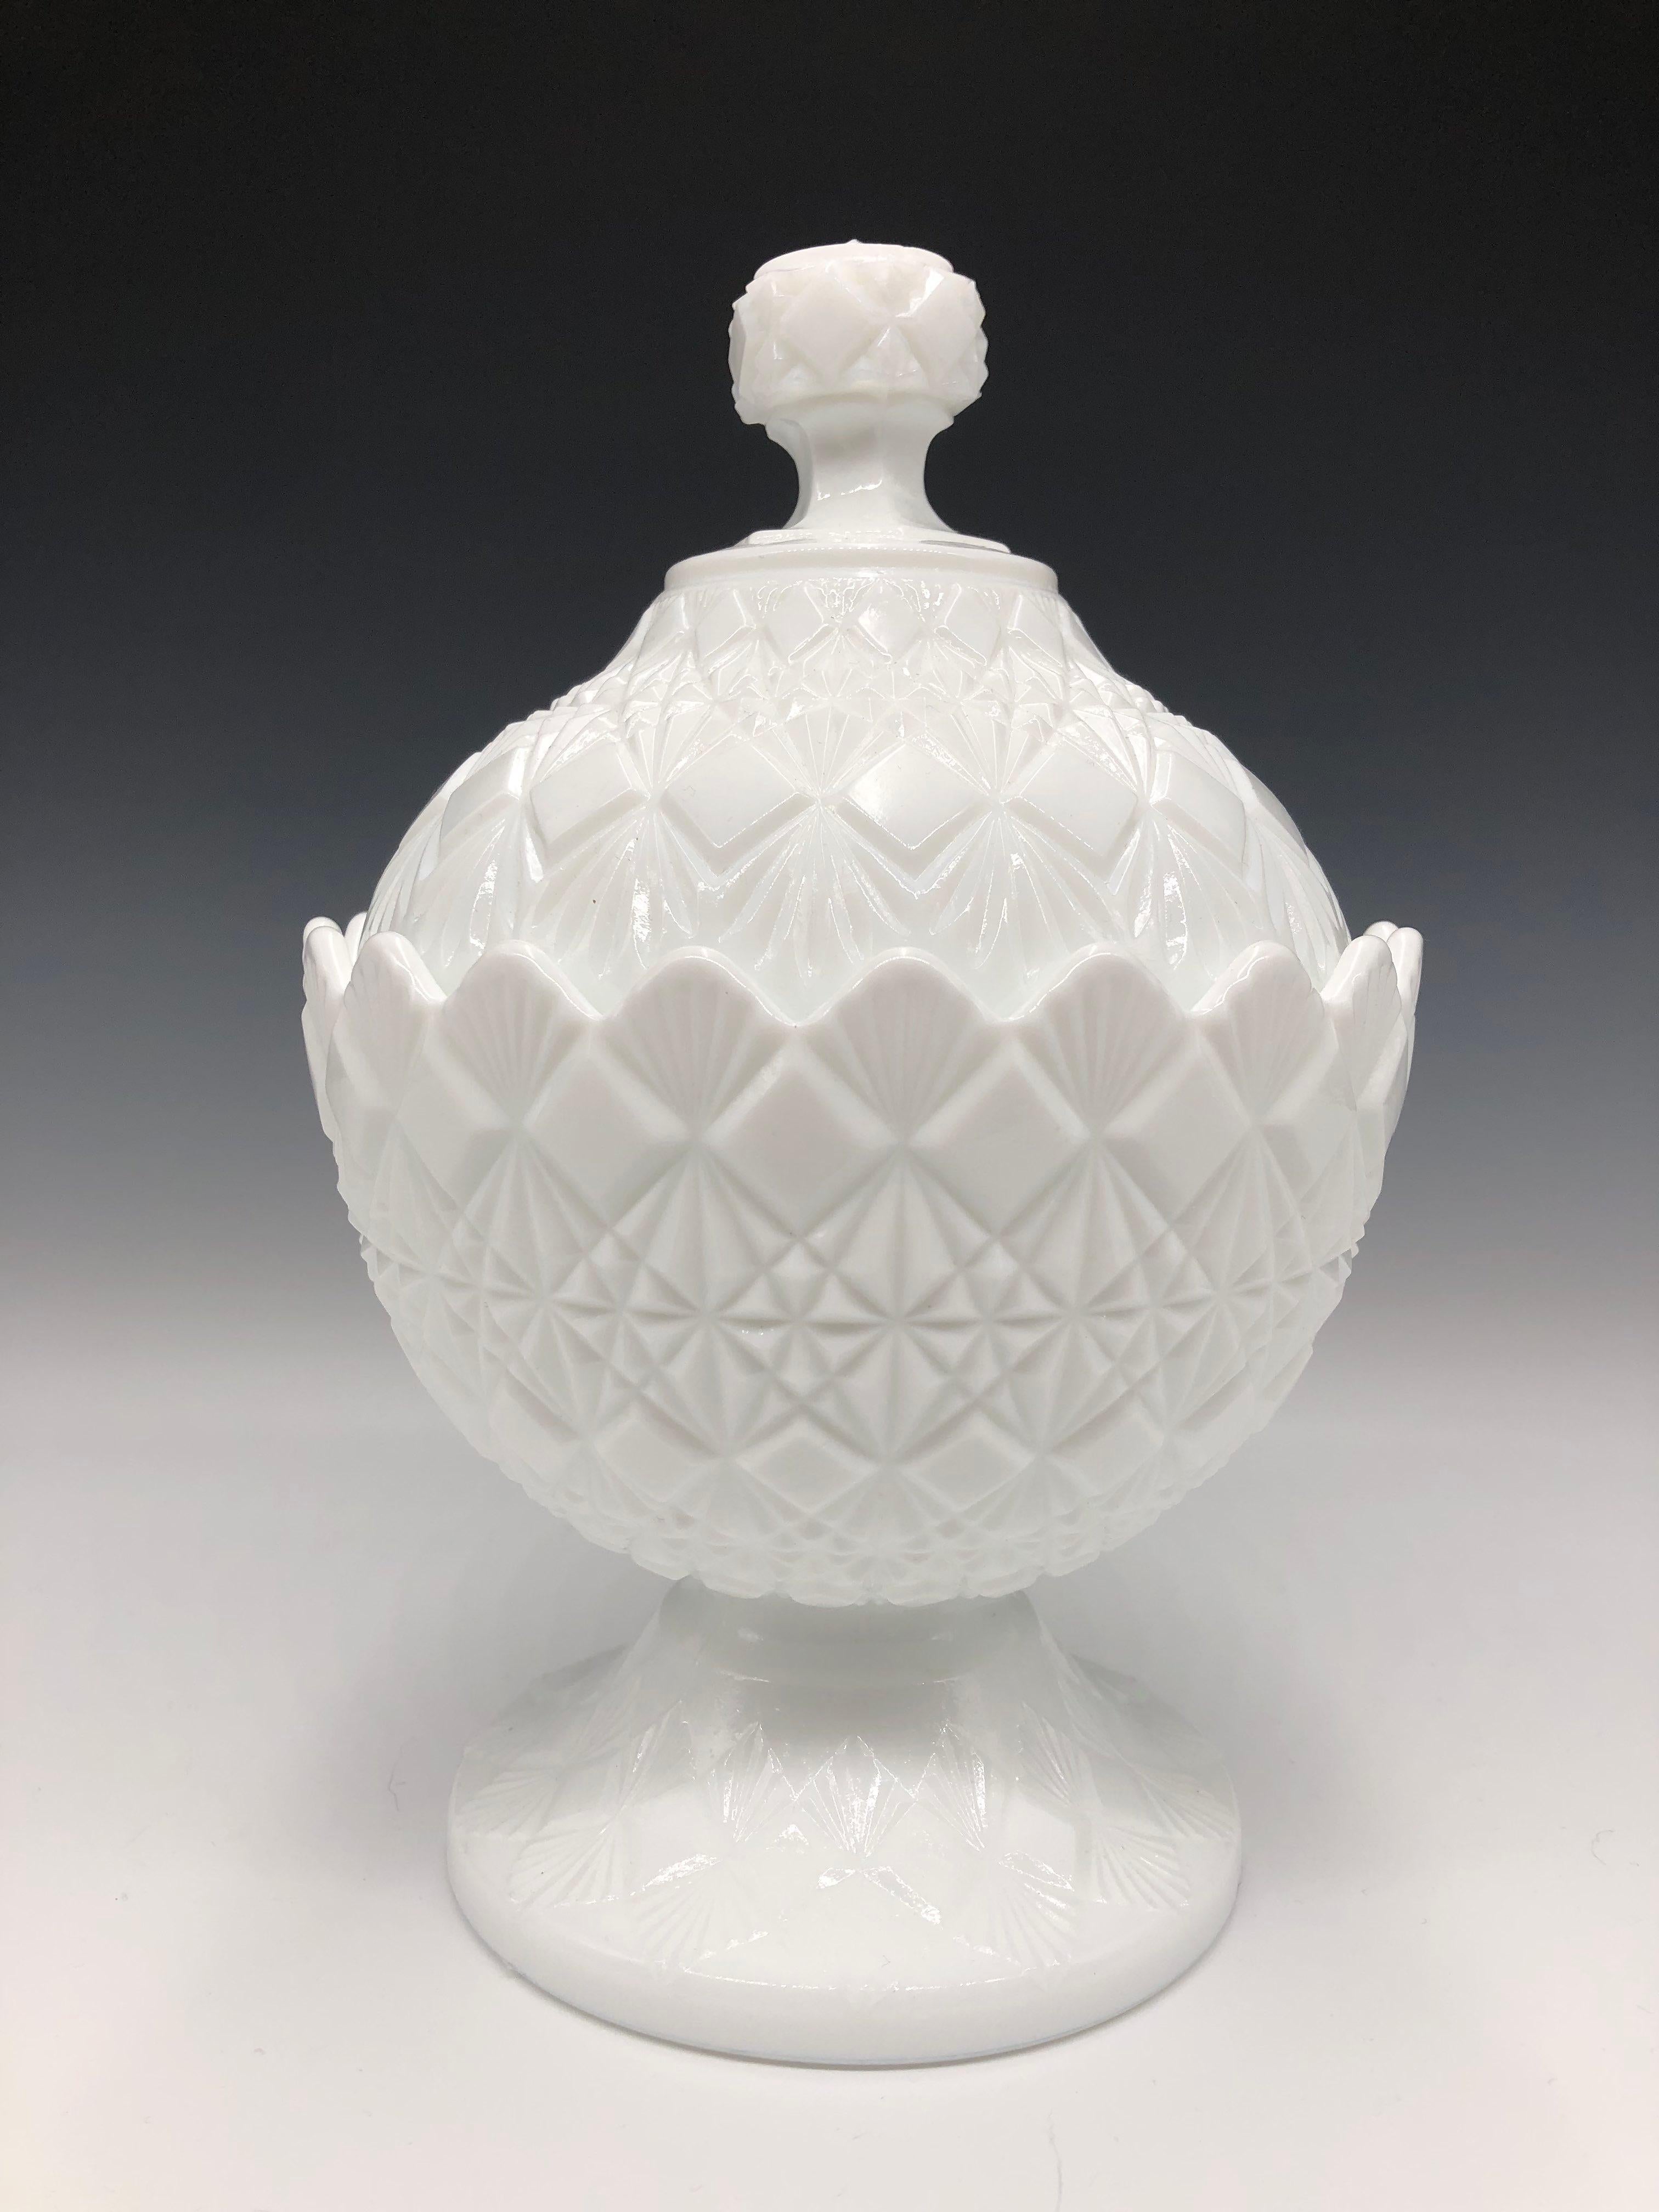 Gorgeous White Vintage Fenton Embossed Olde Virginia Milk Glass Candy / Compote Dish with Lid circa 1960-1979.

Size: 8 1/2